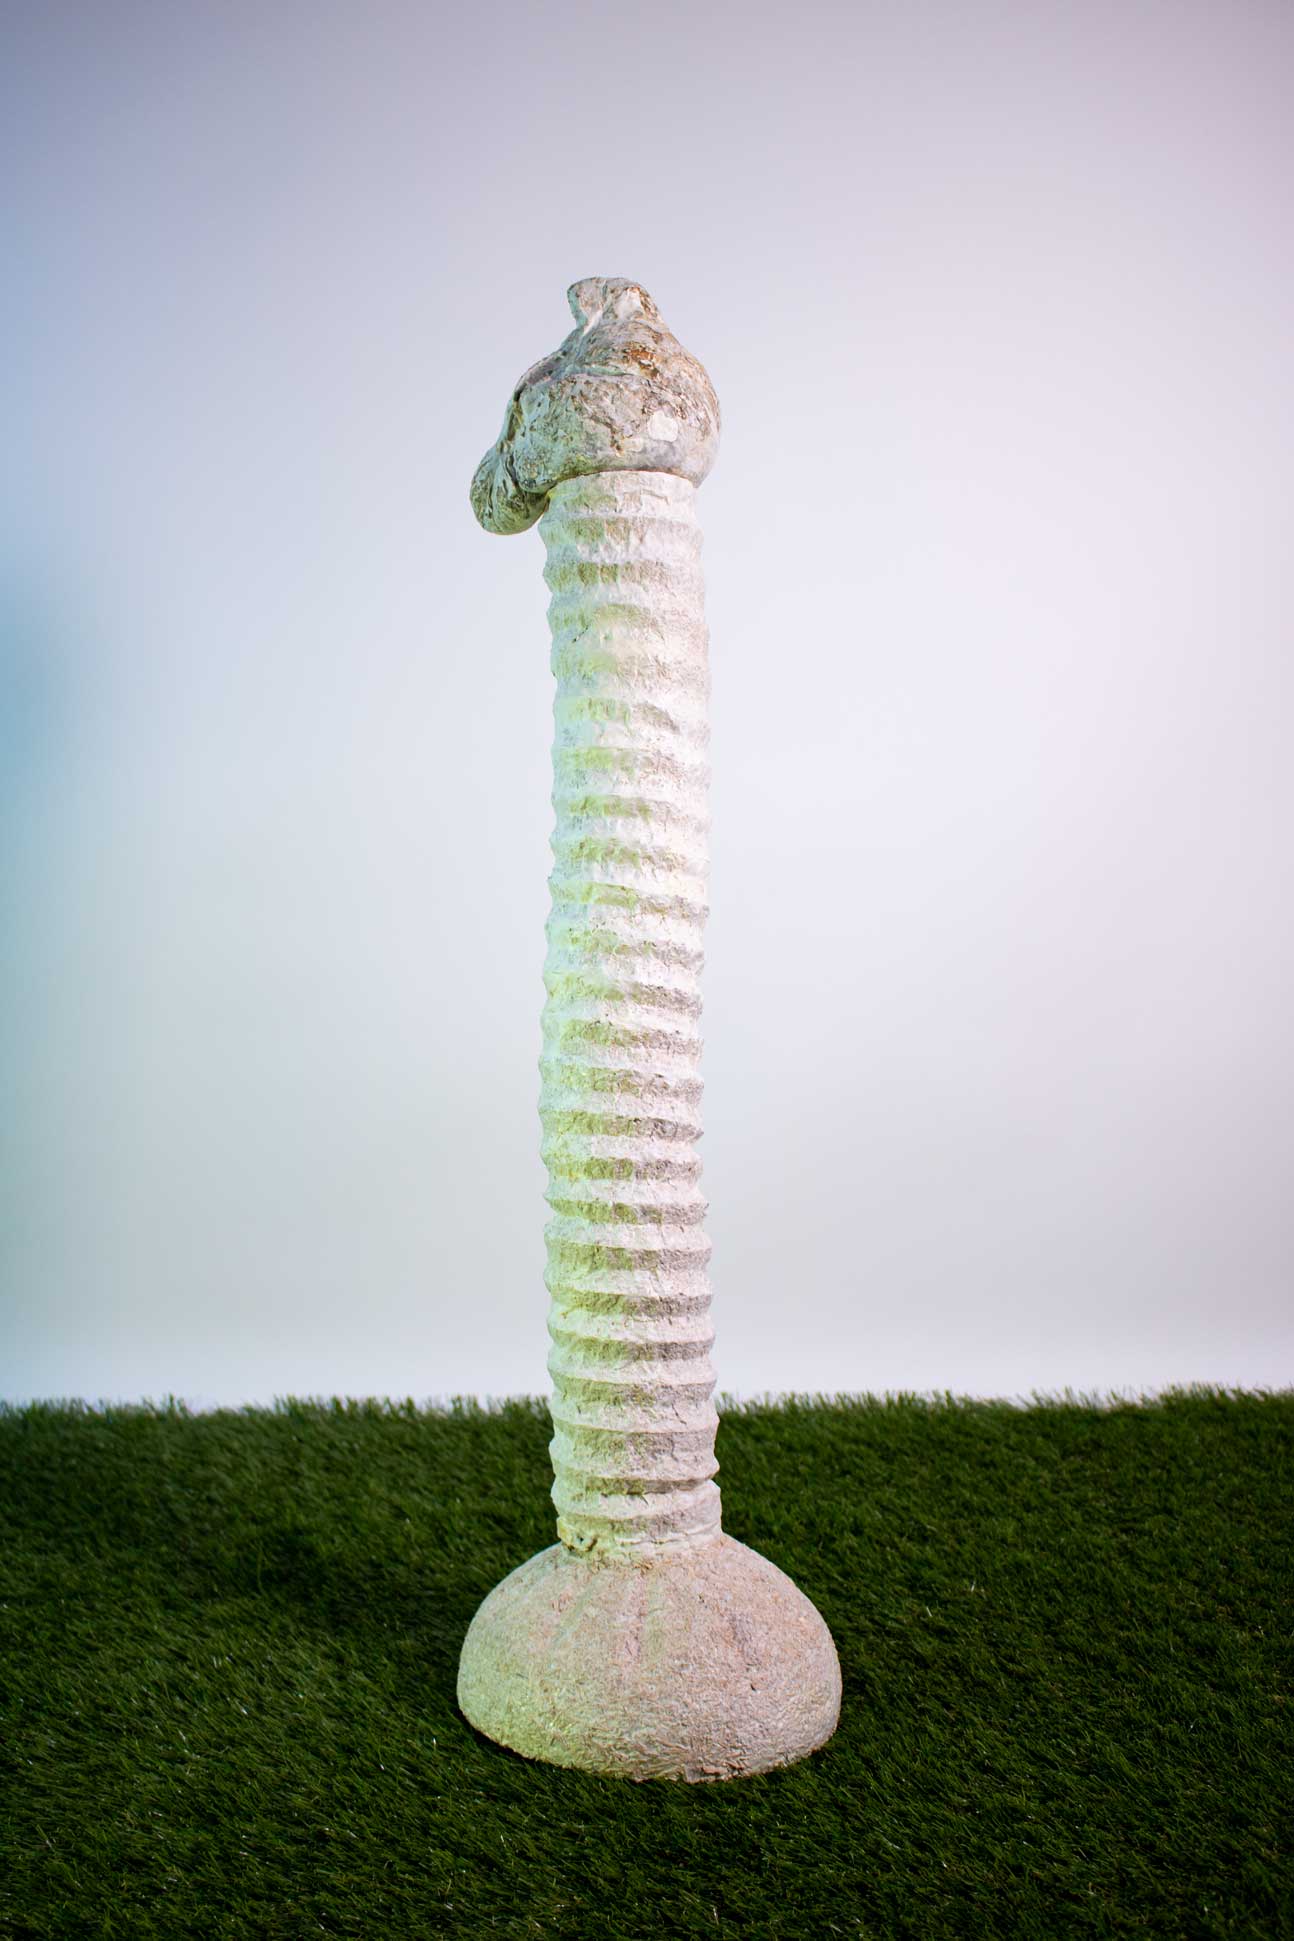 A white/cream textured, organic sculpture shaped like a post sits on faux grass in front of a white wall.